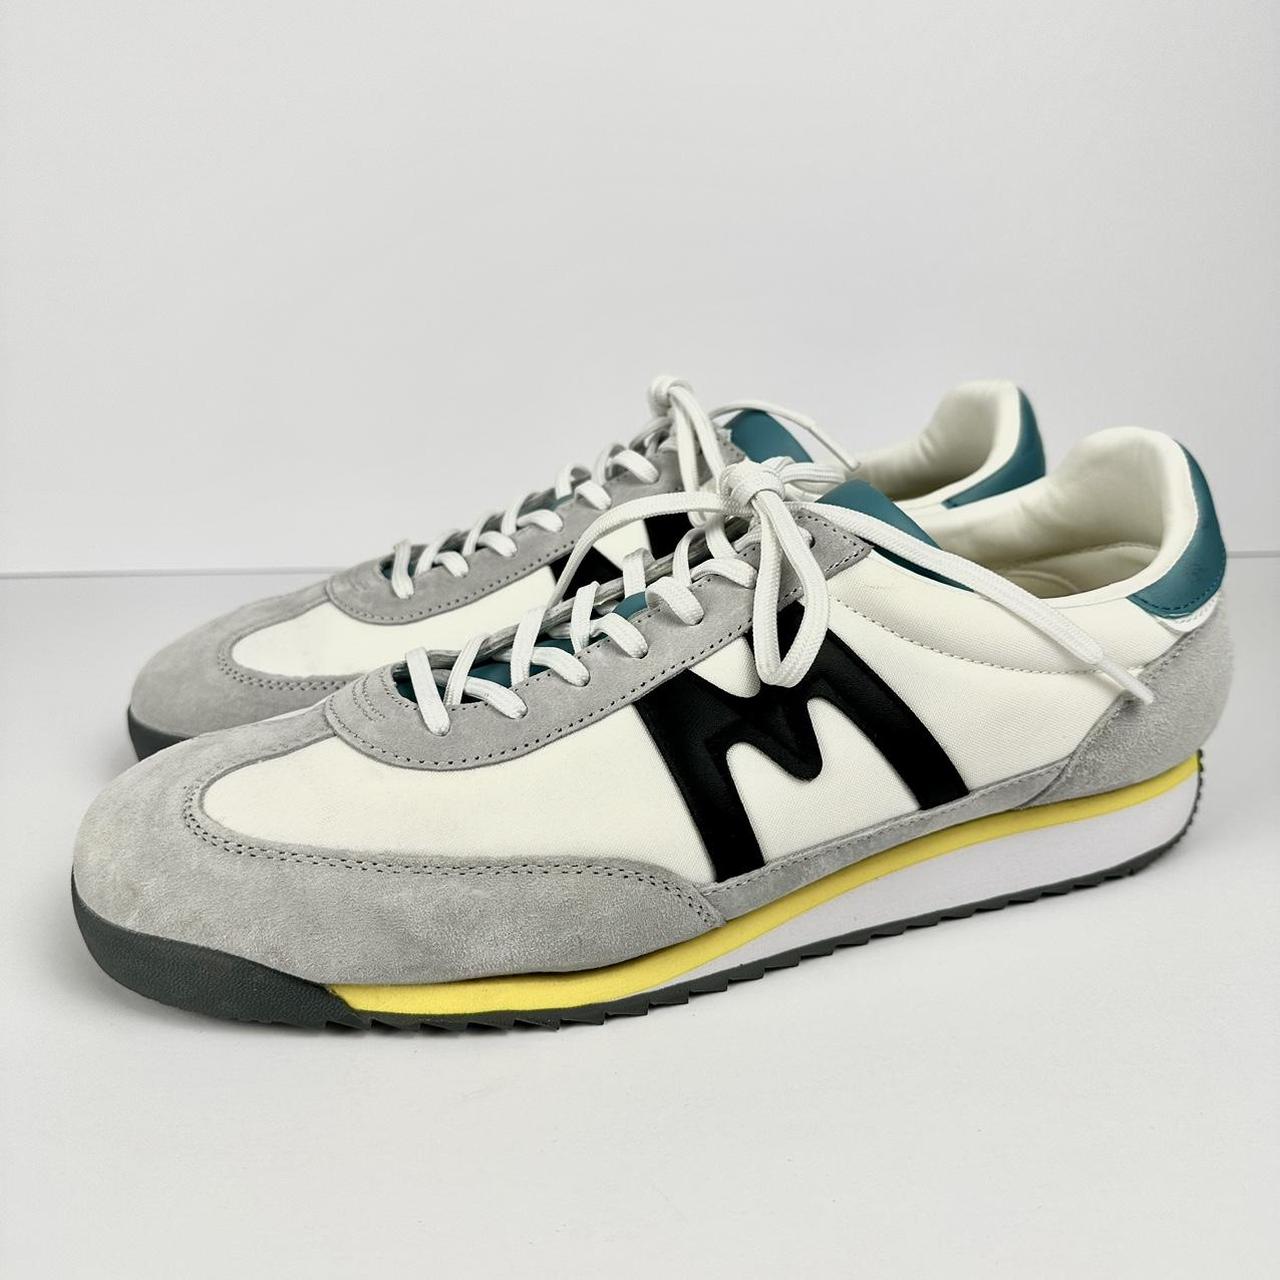 Karhu Men's White and Blue Trainers (3)